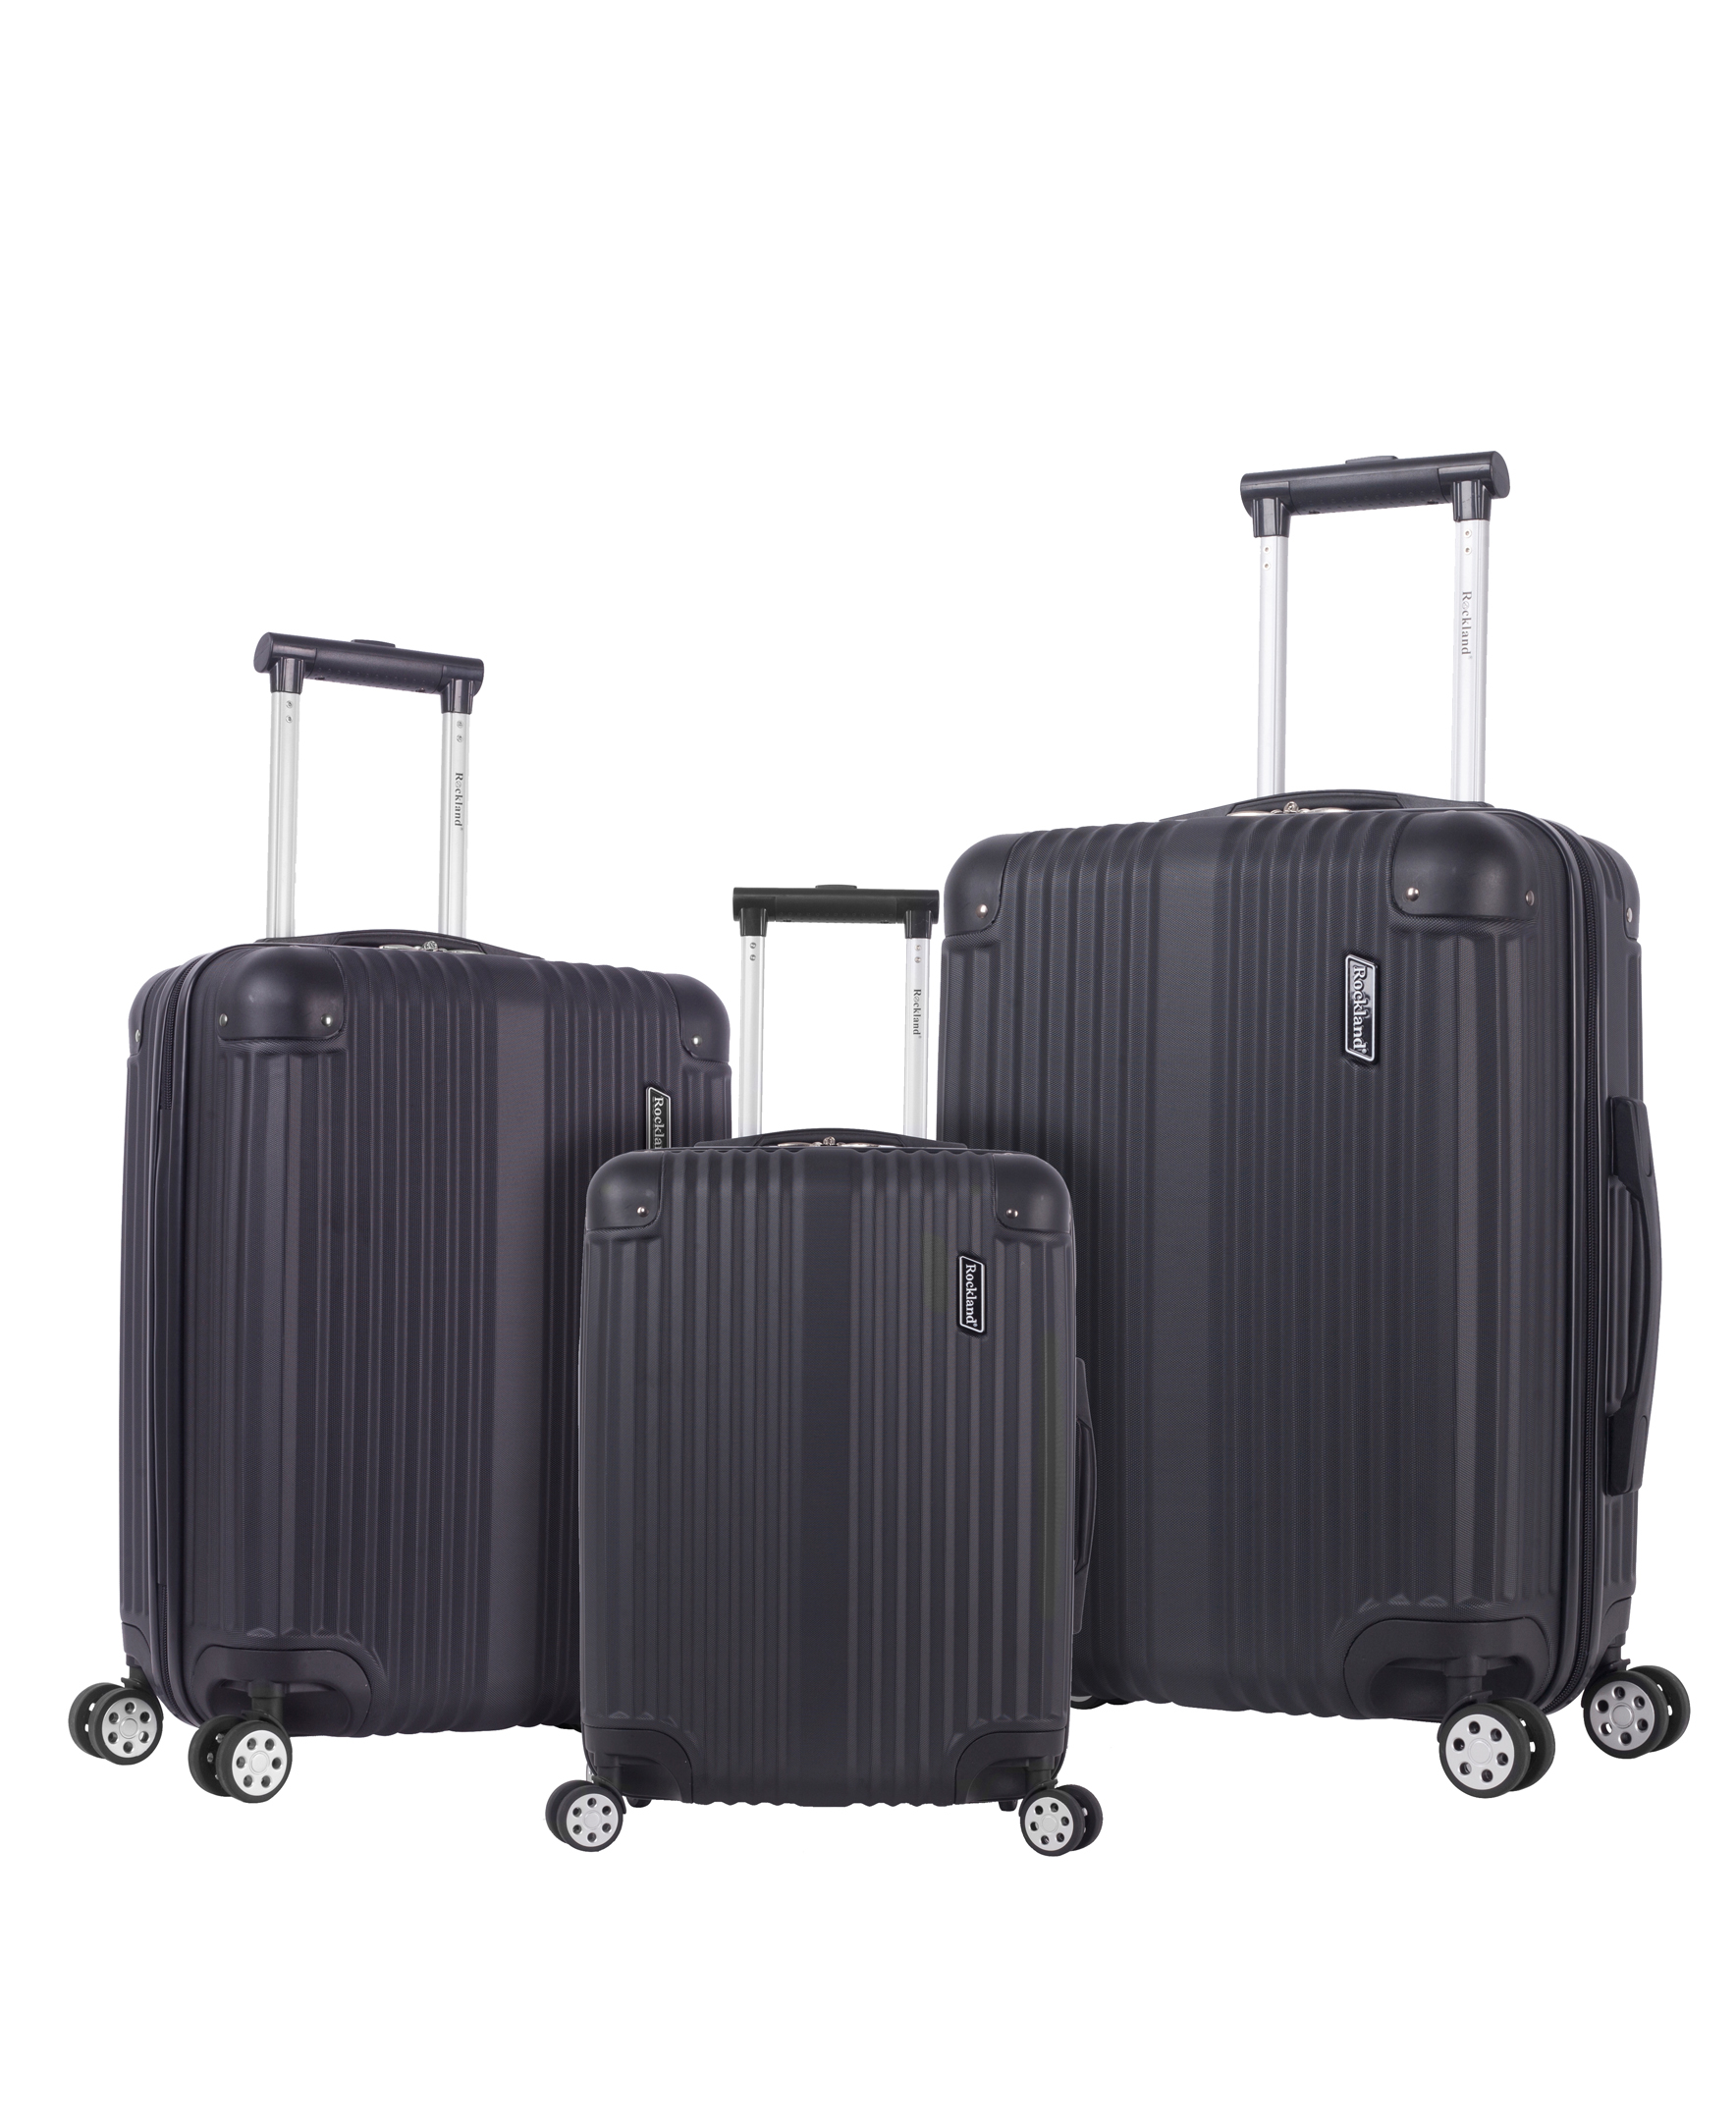 Rockland Luggage Berlin 3 Piece ABS Non-Expandable Luggage Set, Black - image 1 of 9